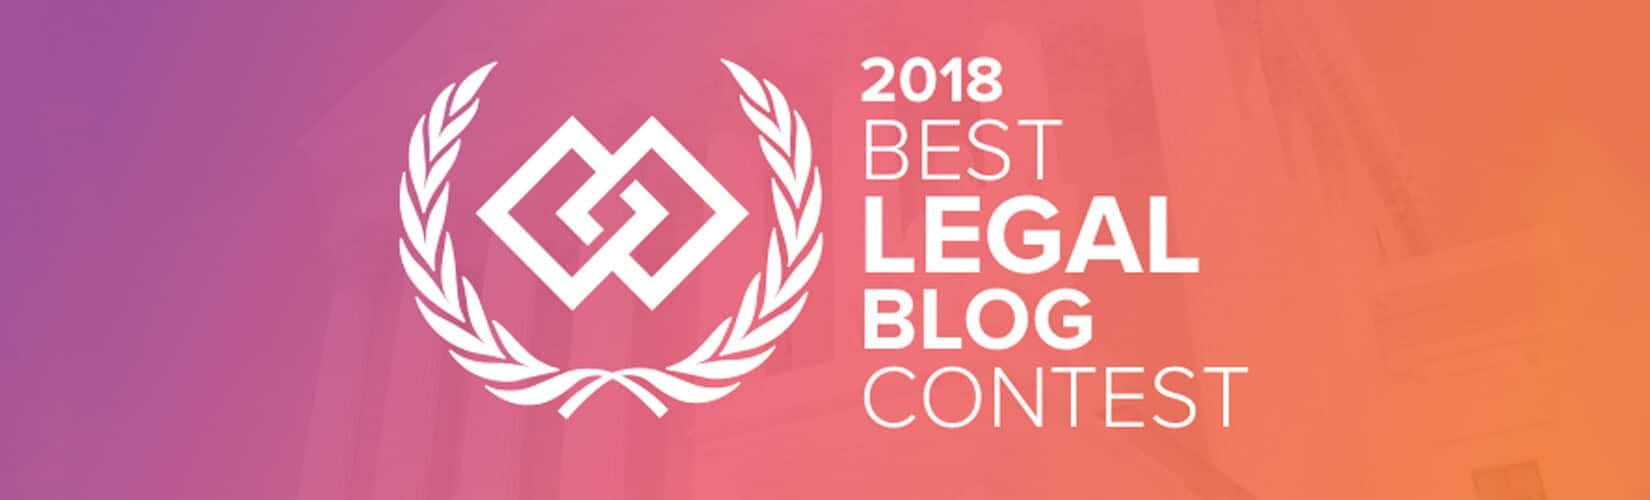 The Expert Institute’s 4th Annual Best Legal Blog Contest Is Underway!